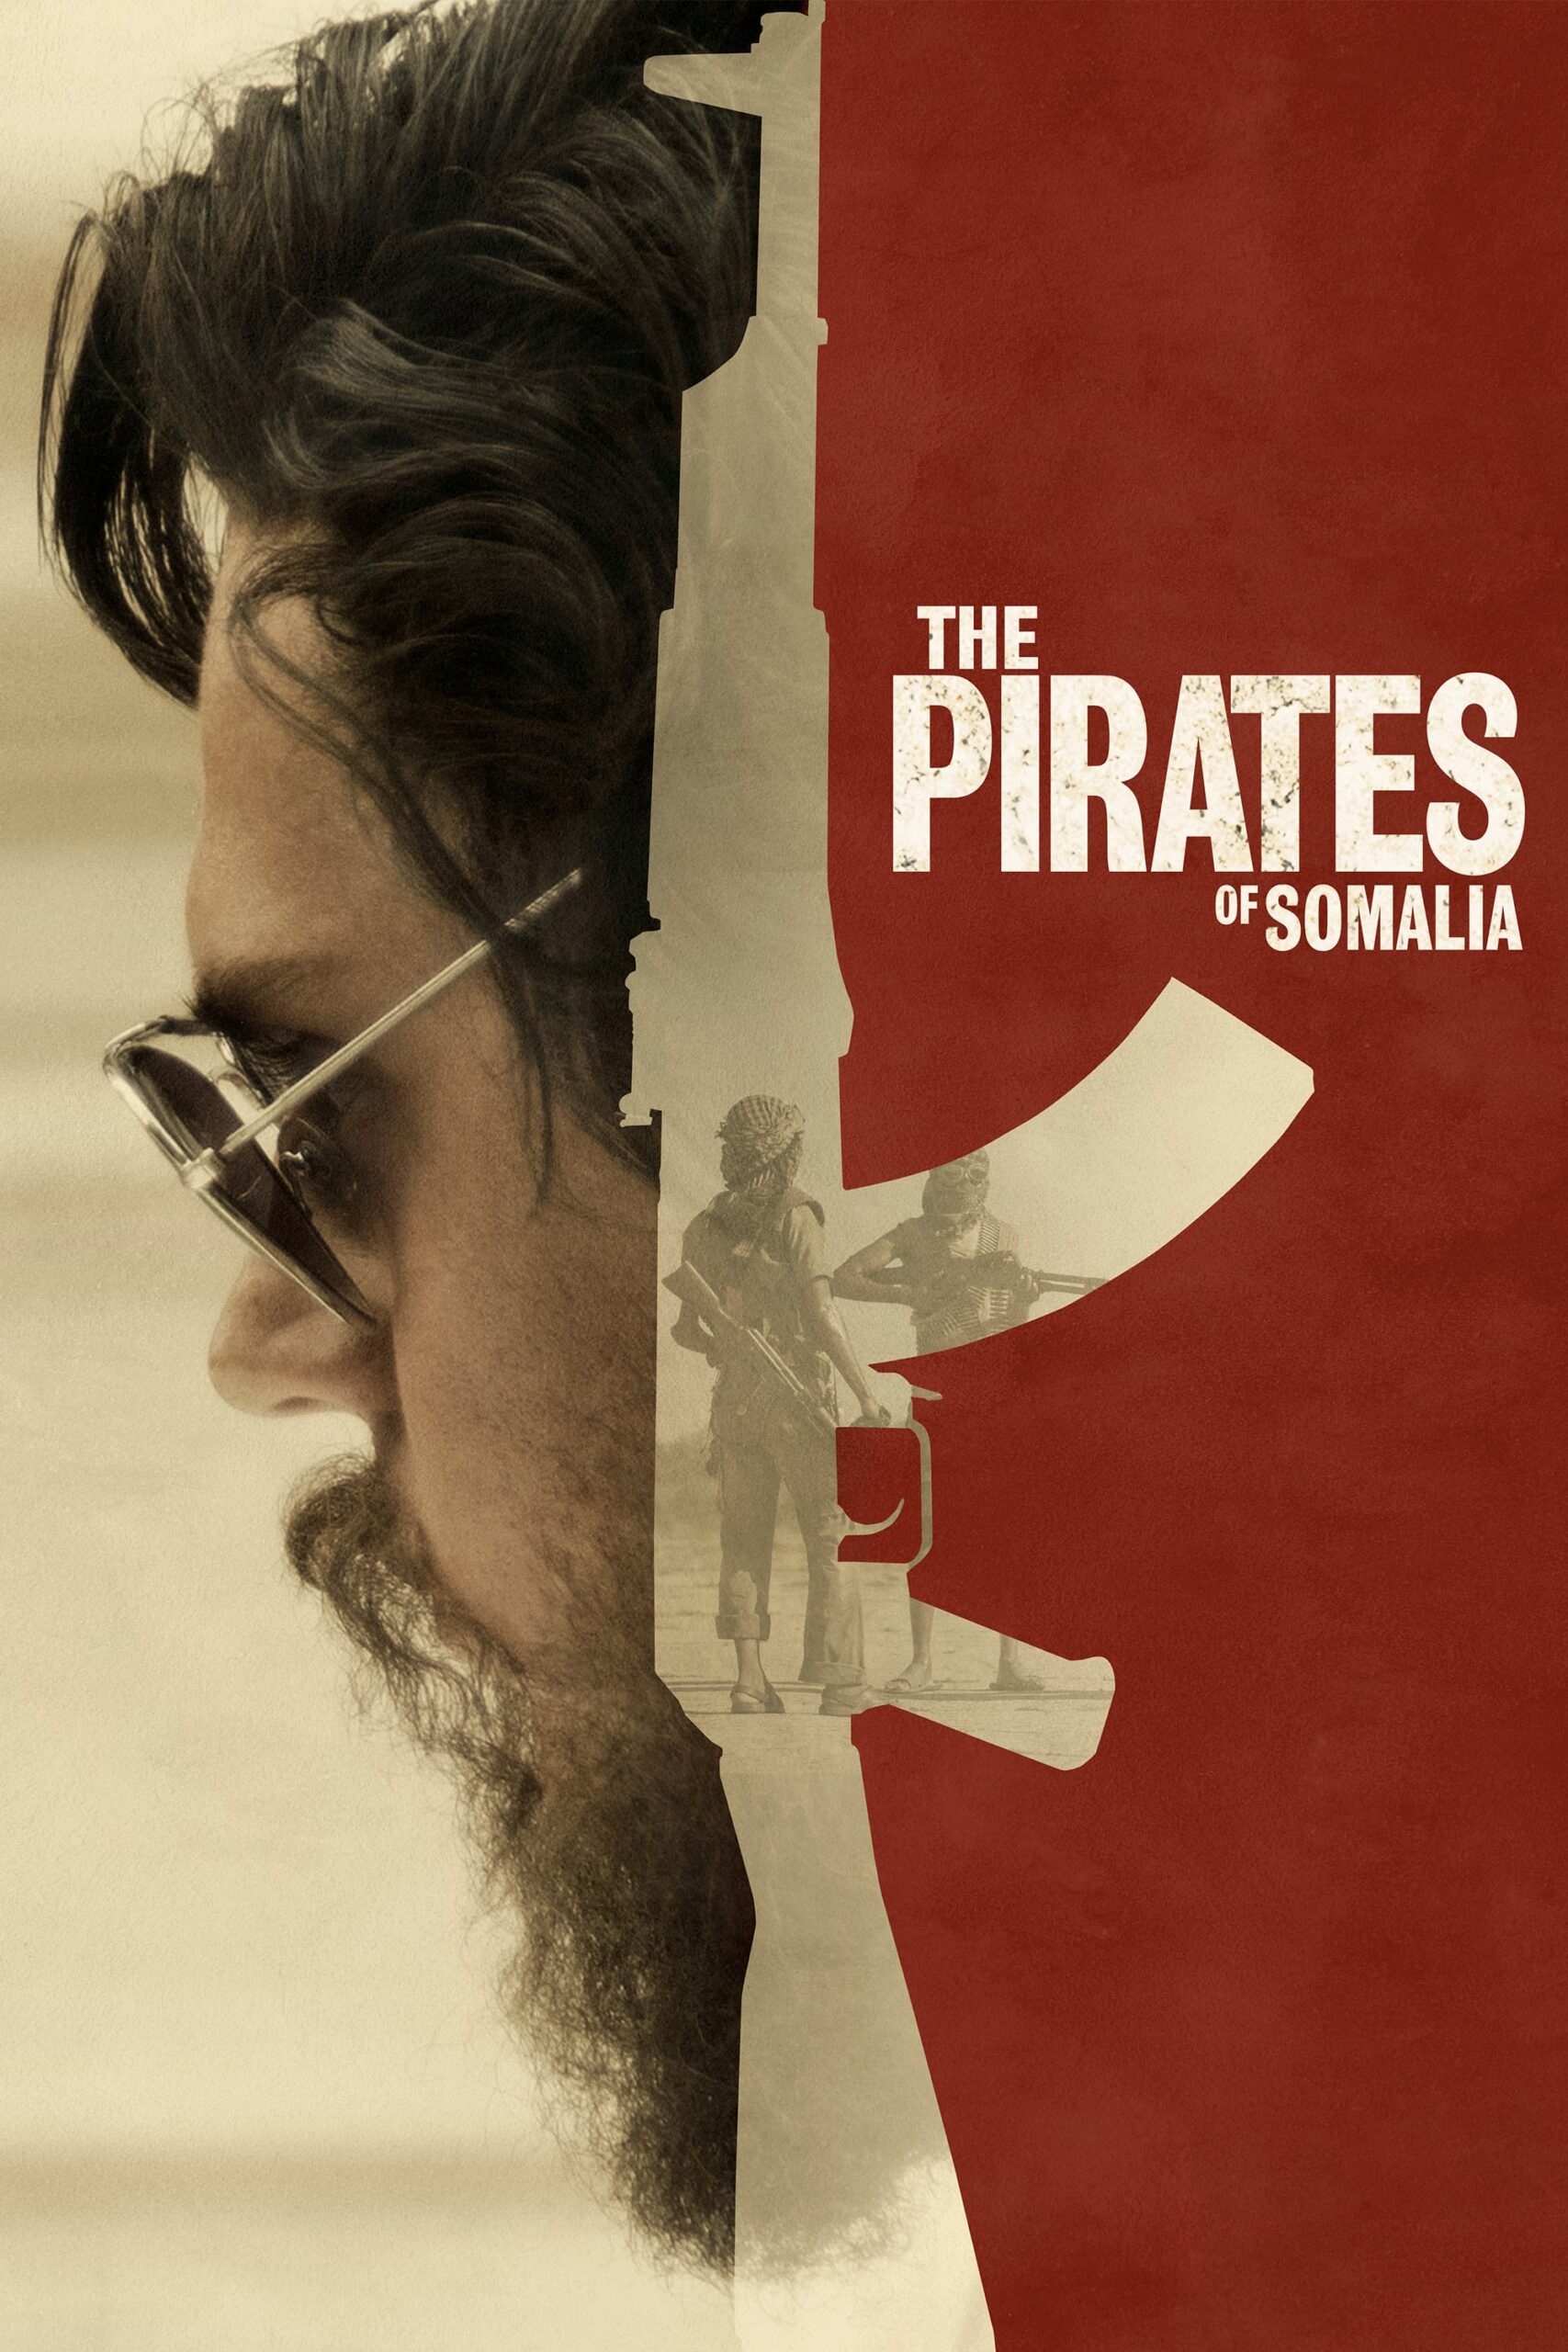 Poster for the movie "The Pirates of Somalia"